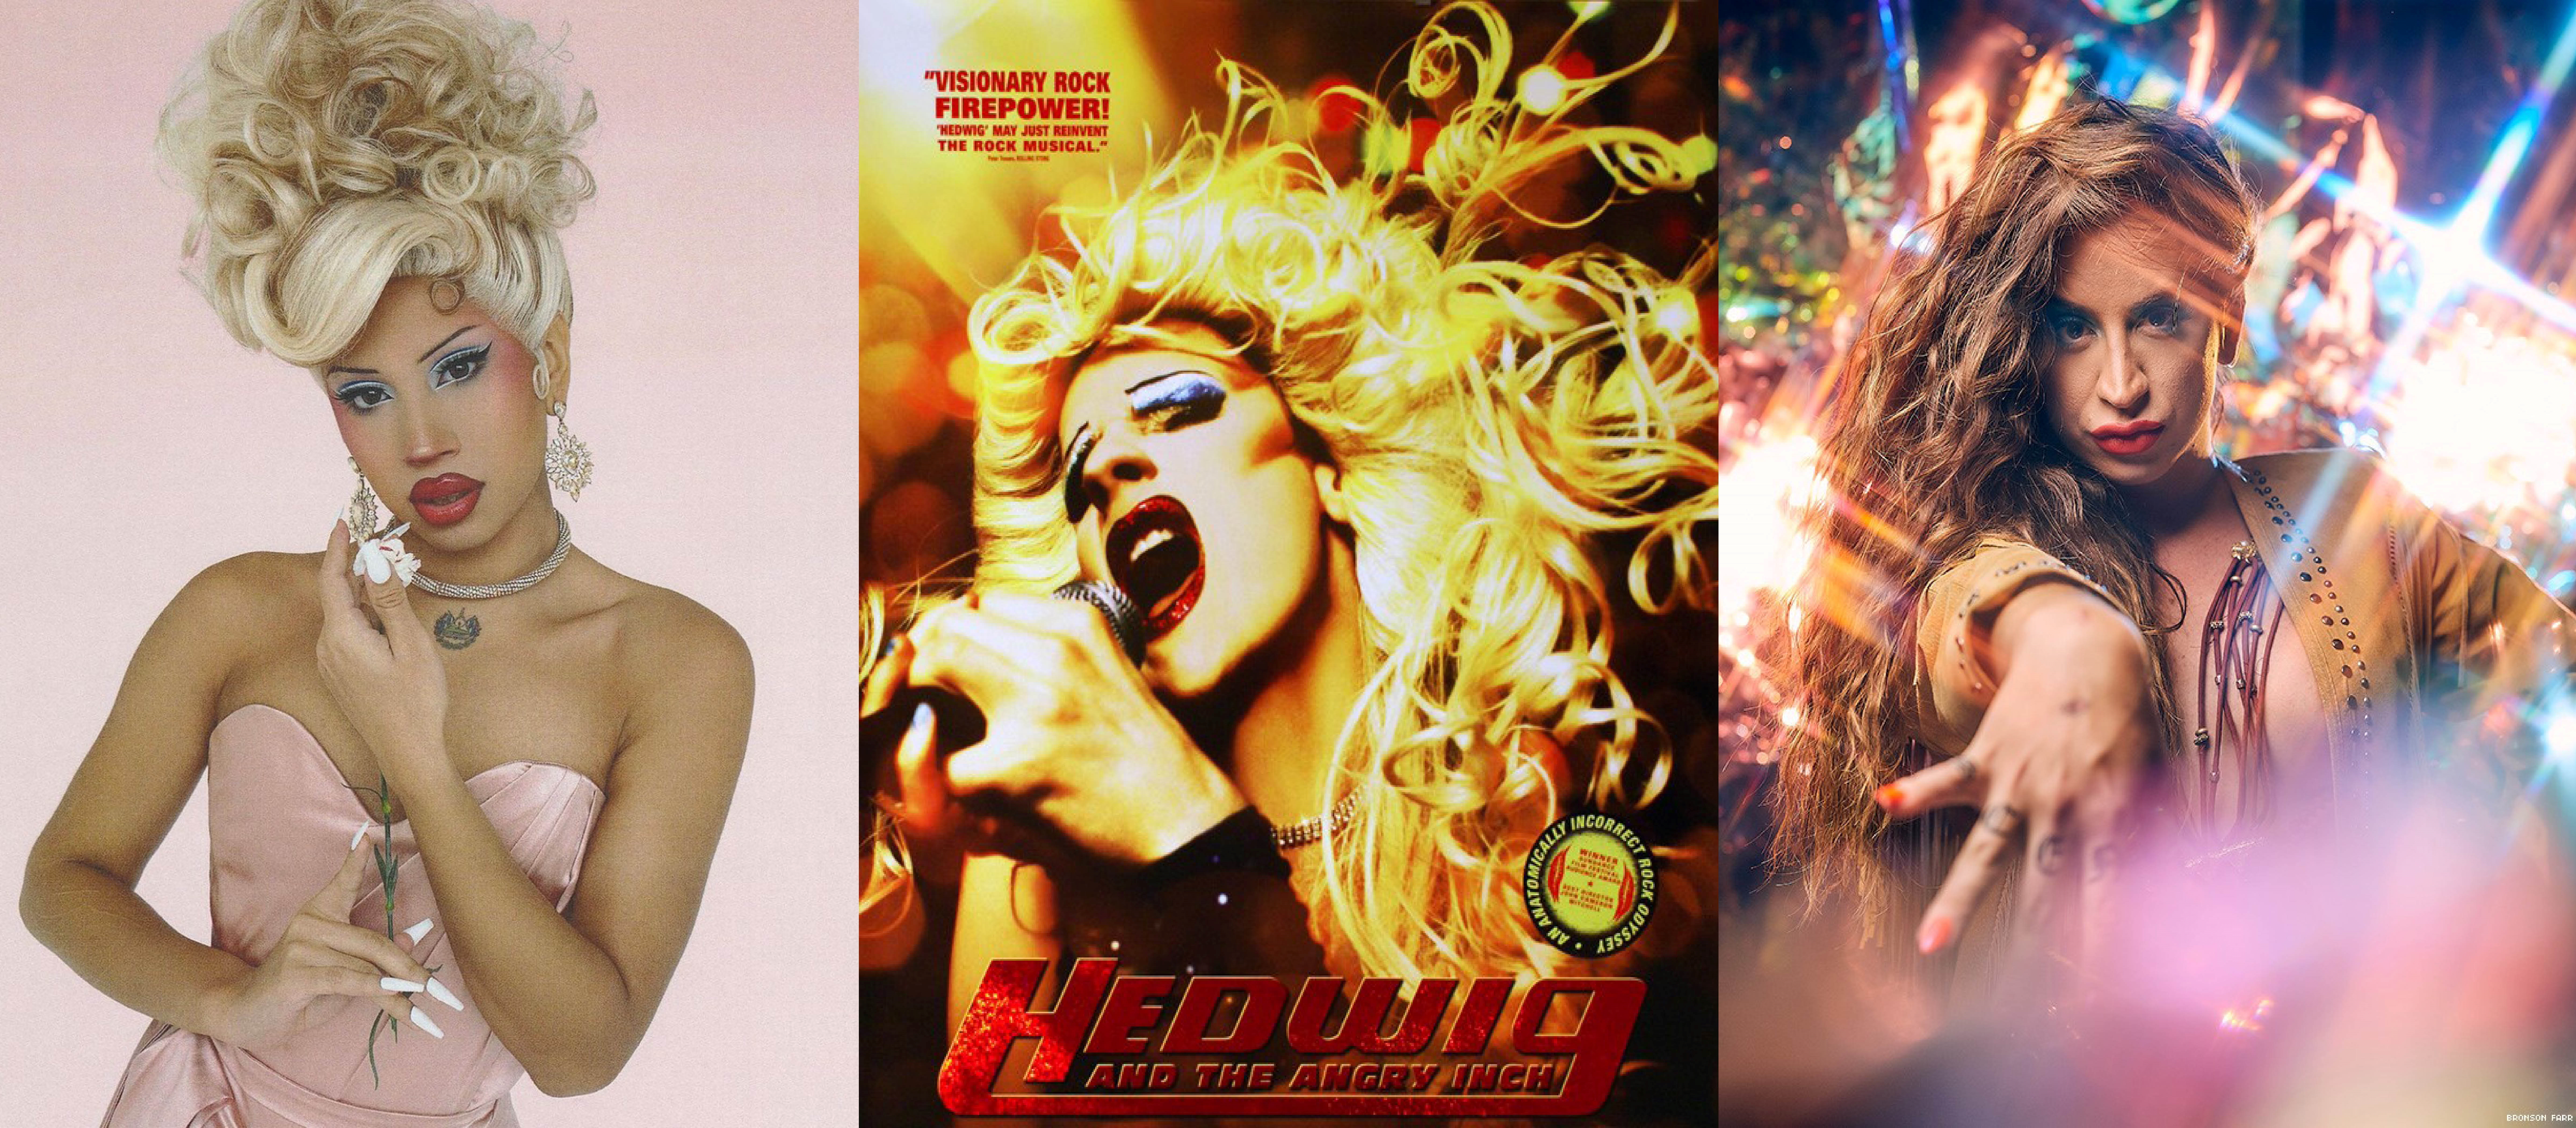 Three images from left to right: Chiquitita, Hedwig and the Angry Inch poster, Charlene Incarnate